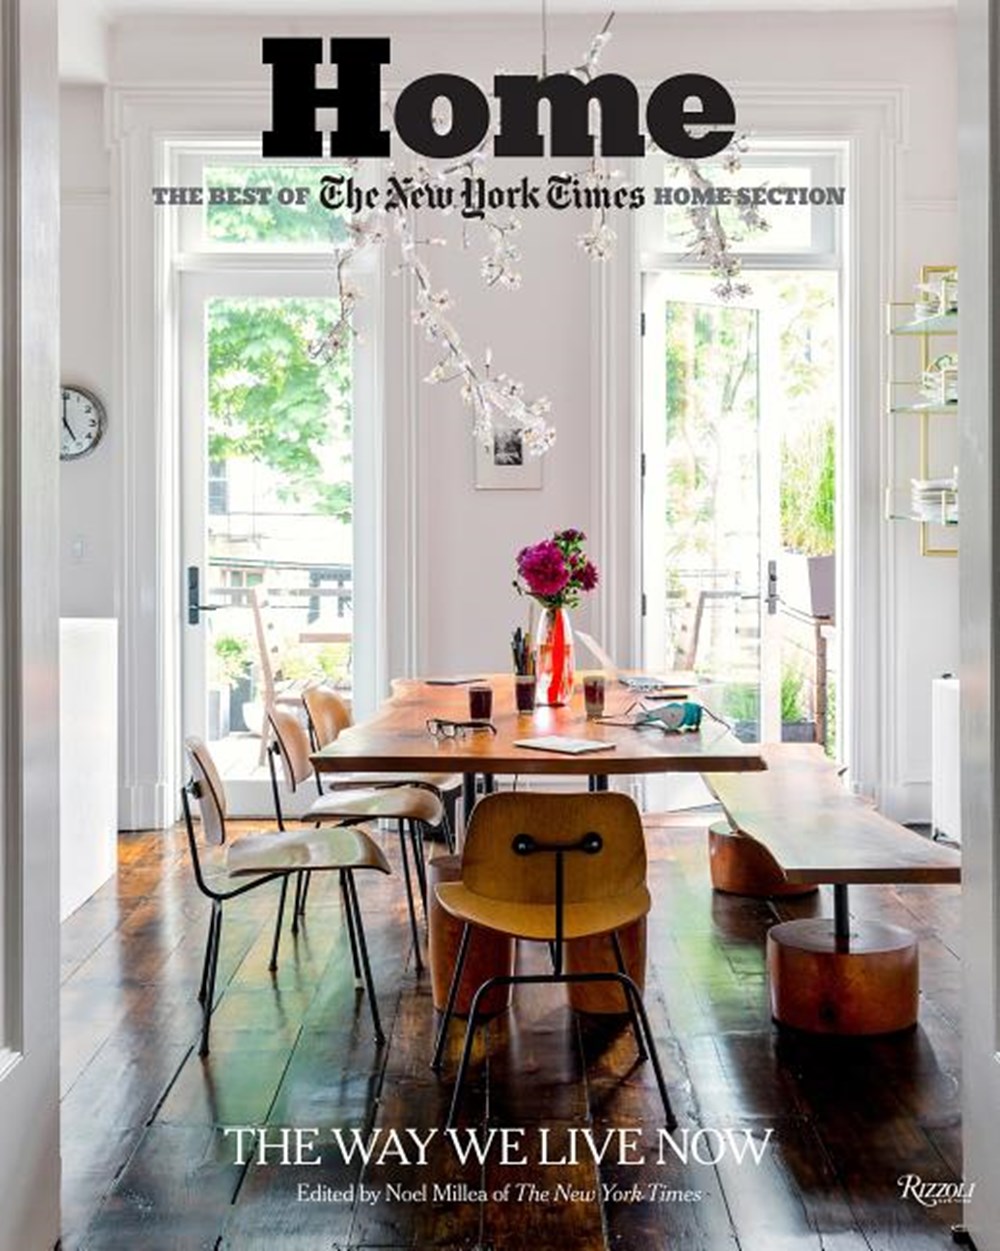 Home: The Best of the New York Times Home Section: The Way We Live Now